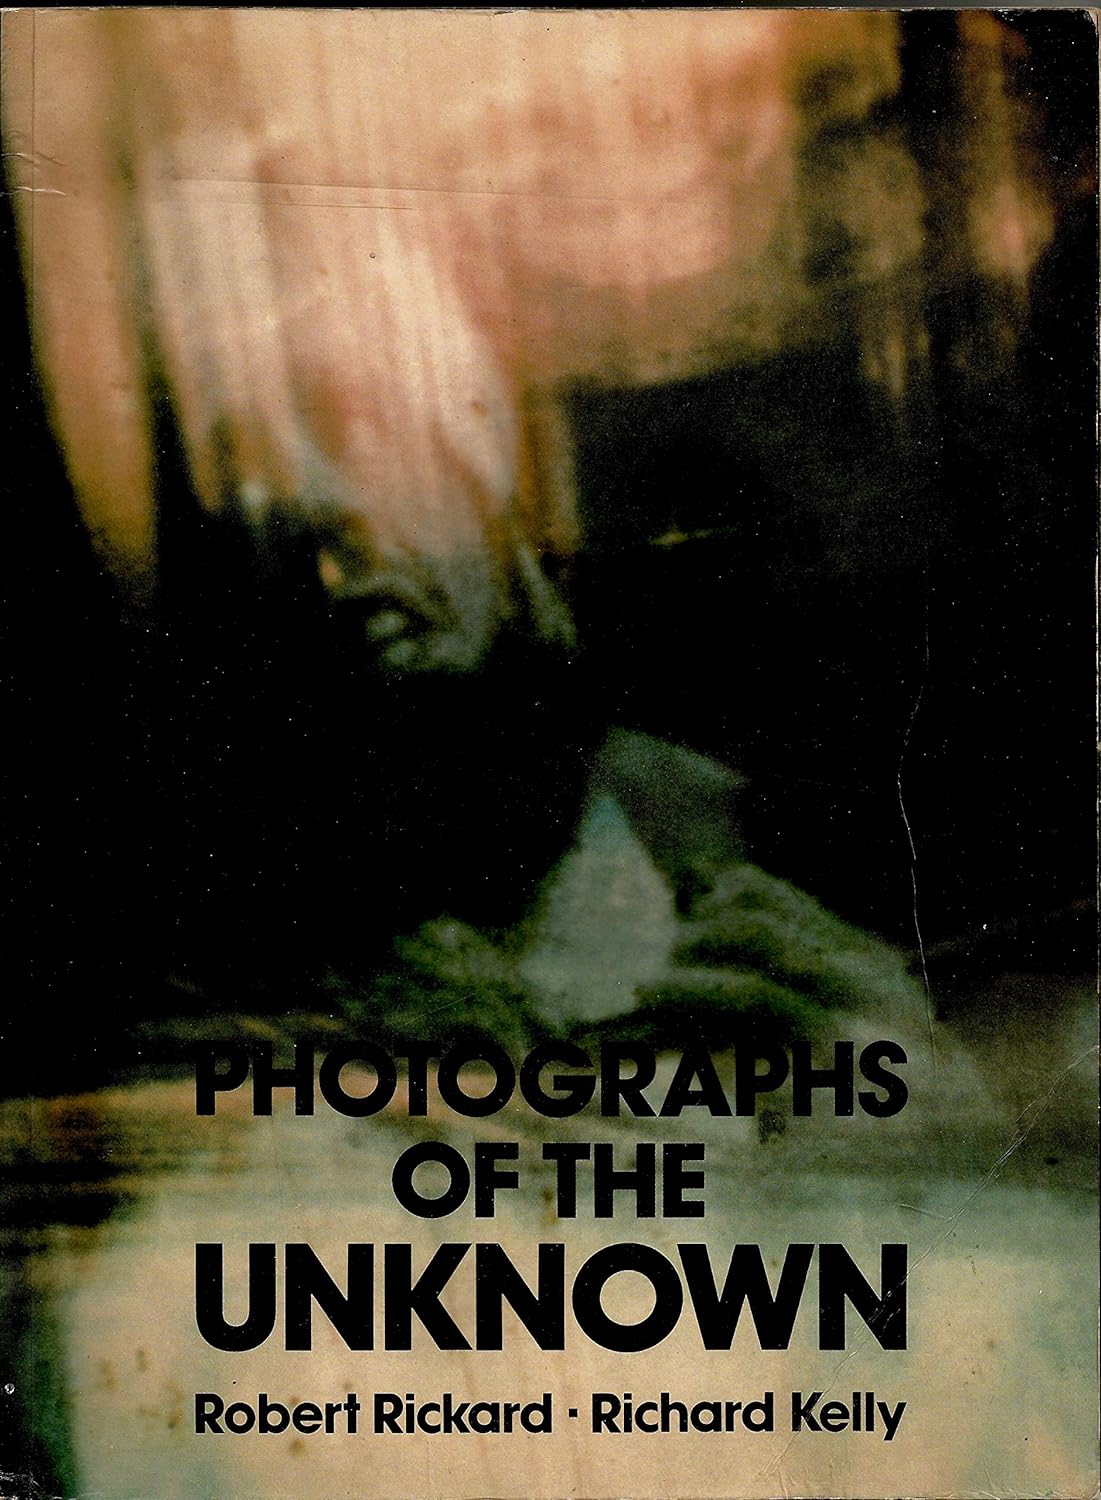 Photographs of the unknown (1980, New English Library)